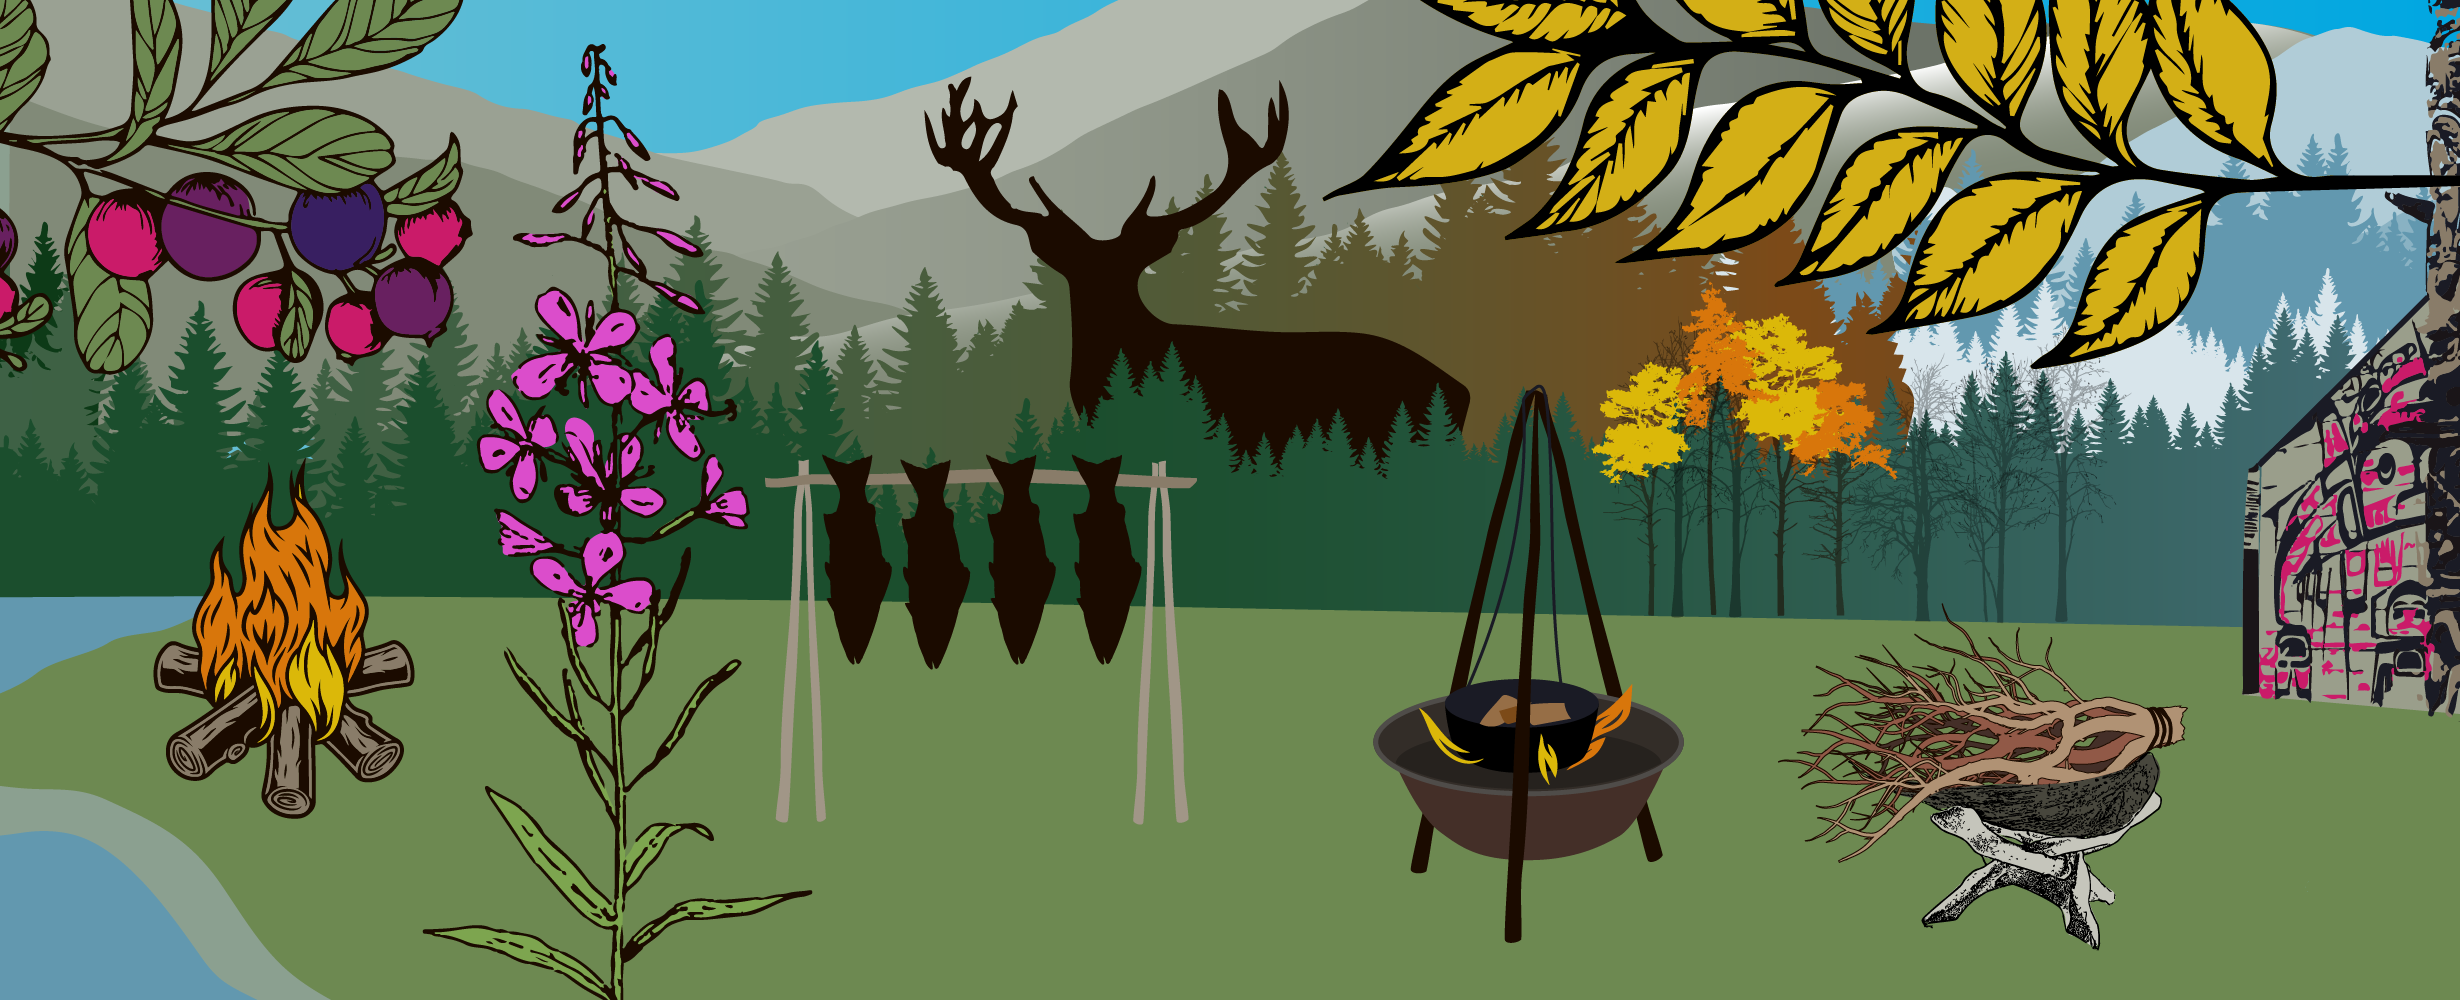 An illustration of summer, with a caribou in the background and a fire burning, with fish drying